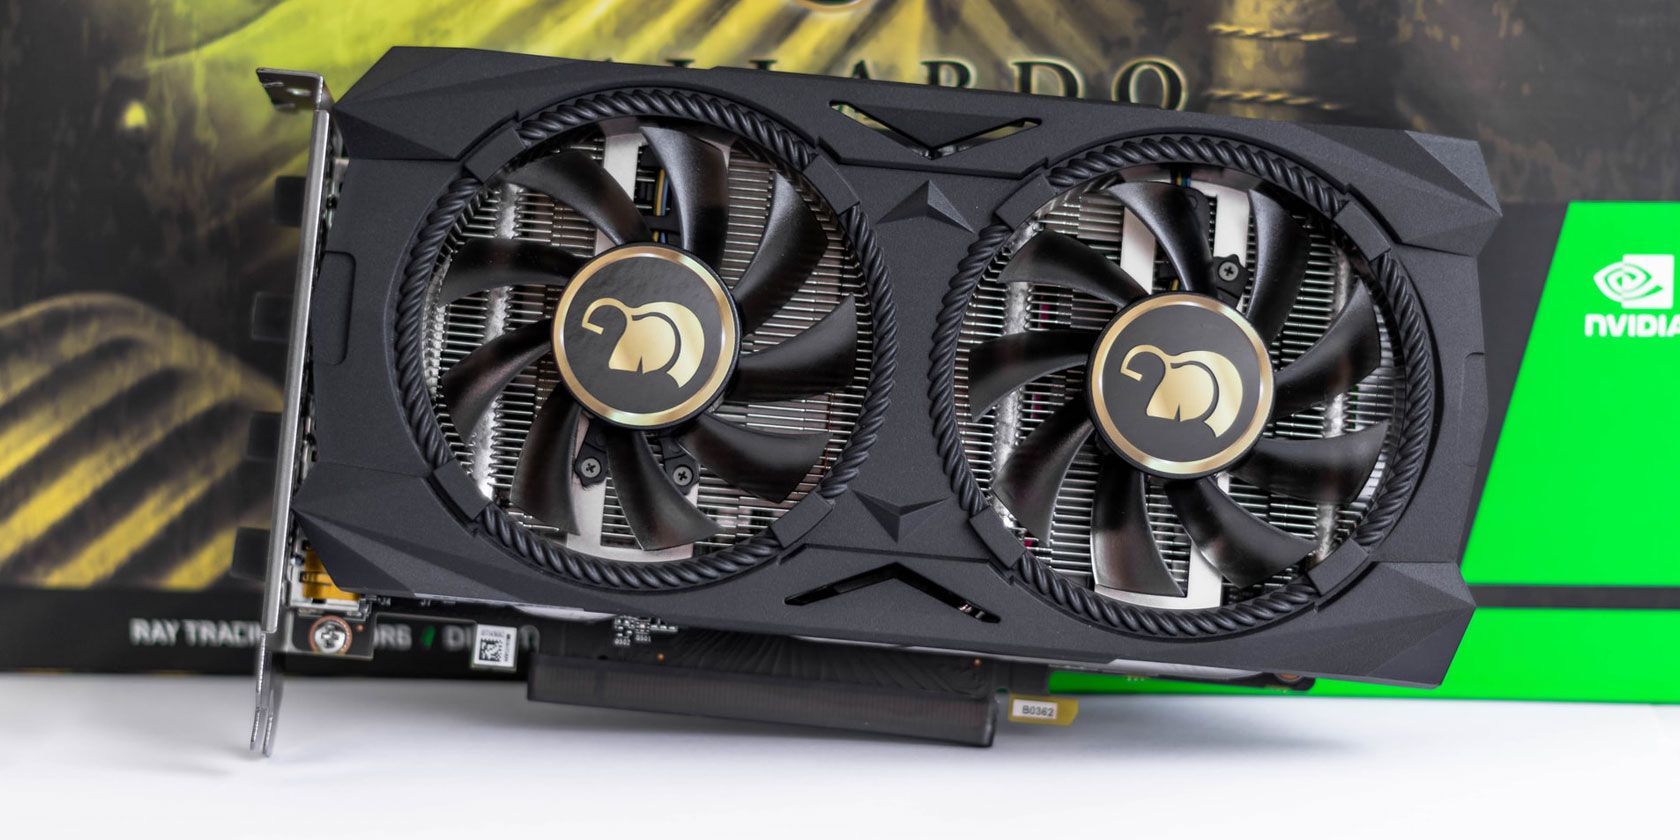 Download and install the latest graphics card drivers from the manufacturer's website.
Restart the installation process after updating the drivers.